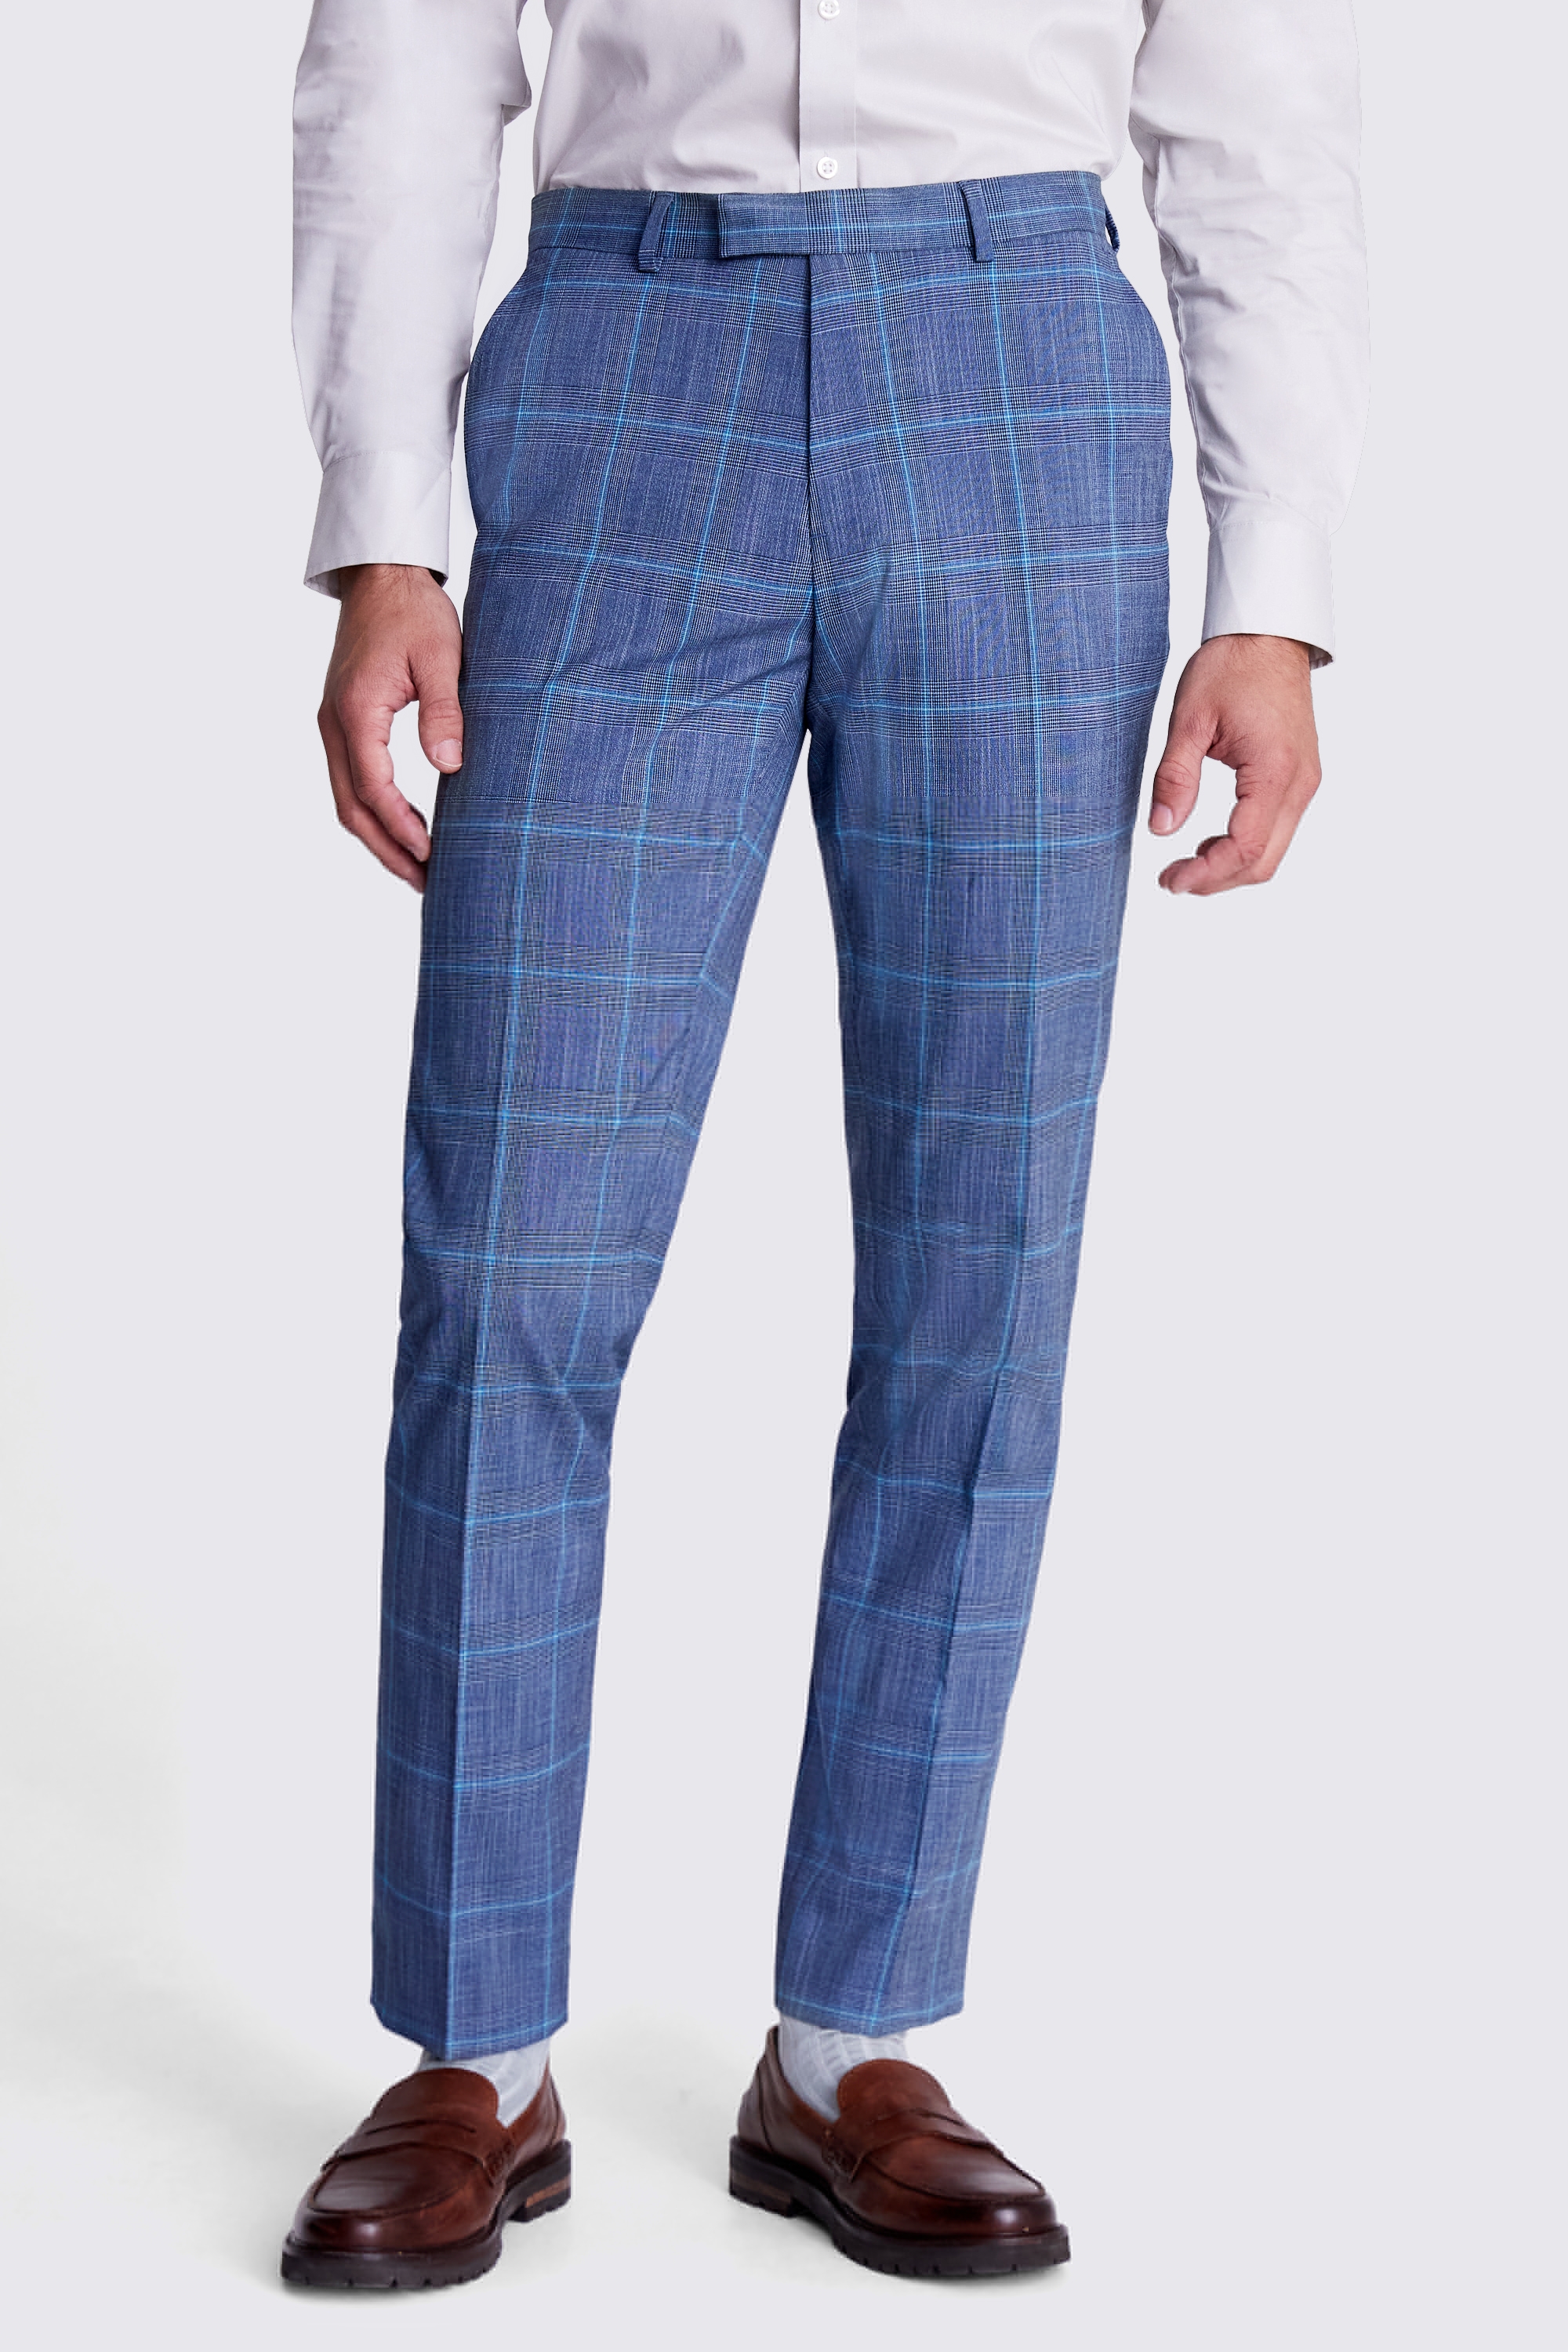 Tailored Fit Aqua Check Trousers | Buy Online at Moss